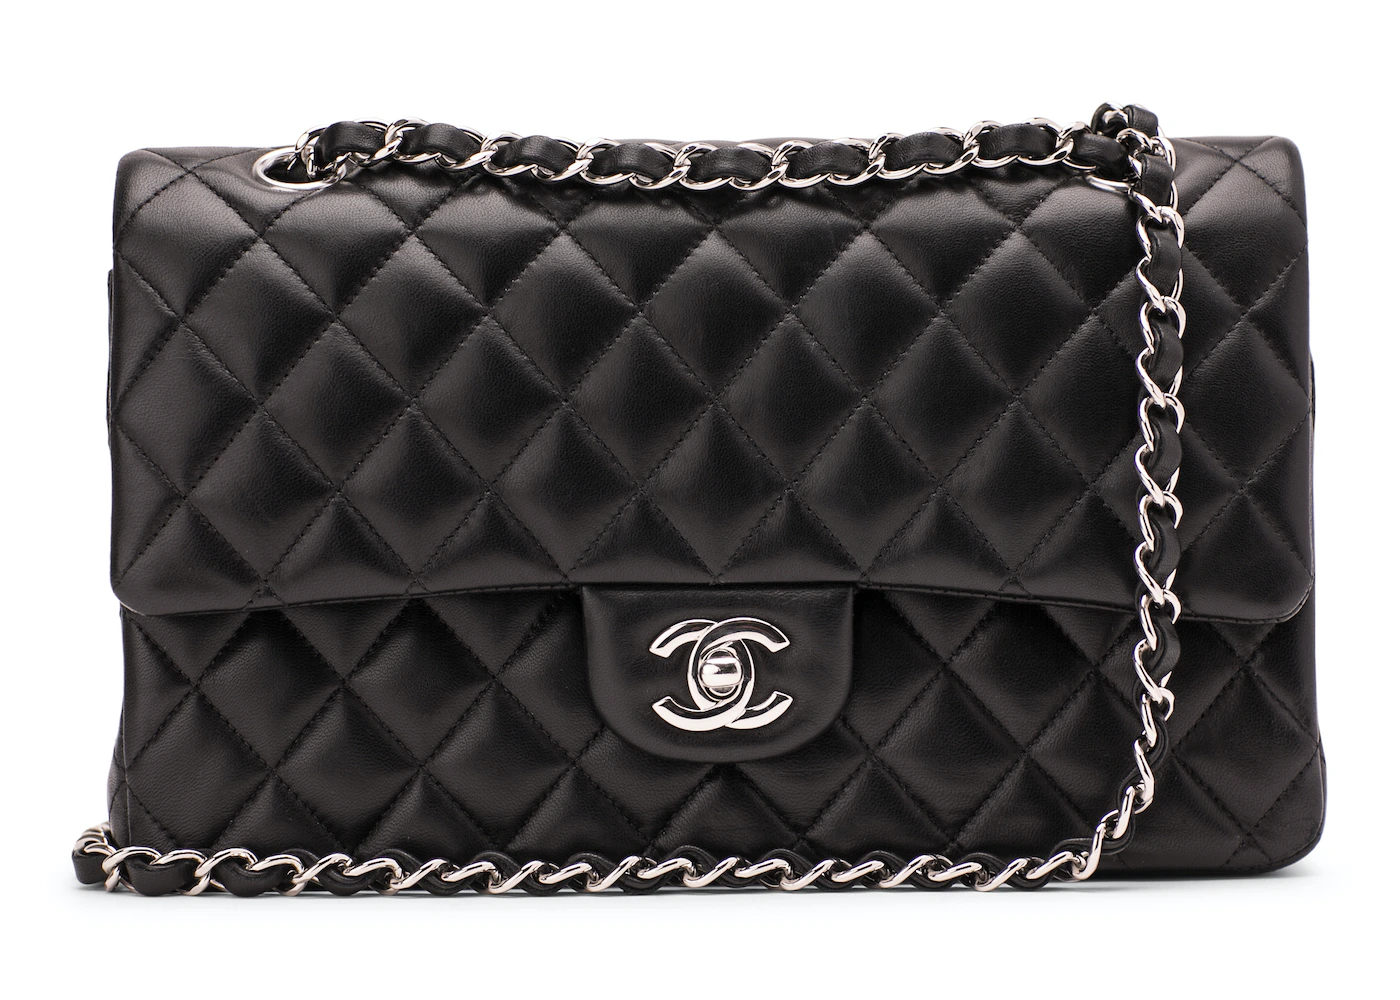 Chanel Classic Double Flap 30cm Bag Silver Hardware Lambskin Leather  Spring/Summer 2018 Collection, Black - SYMode Vip